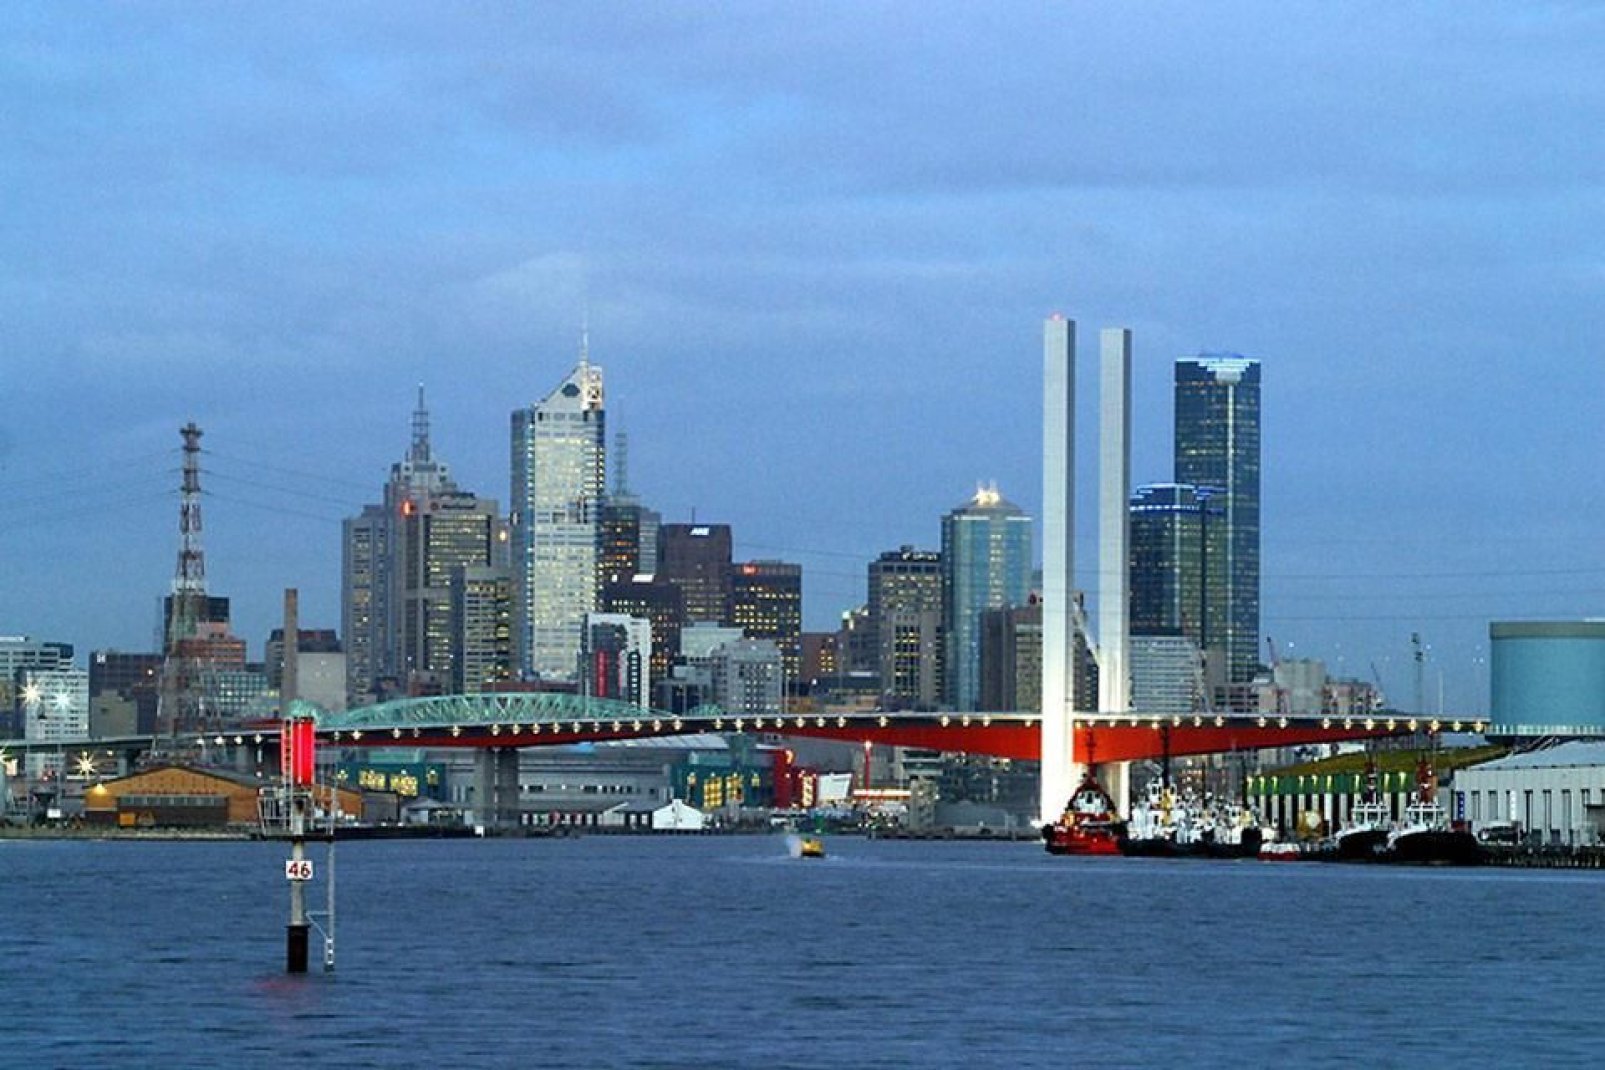 Melbourne is often thus considered because it hosts numerous cultural and sports events.